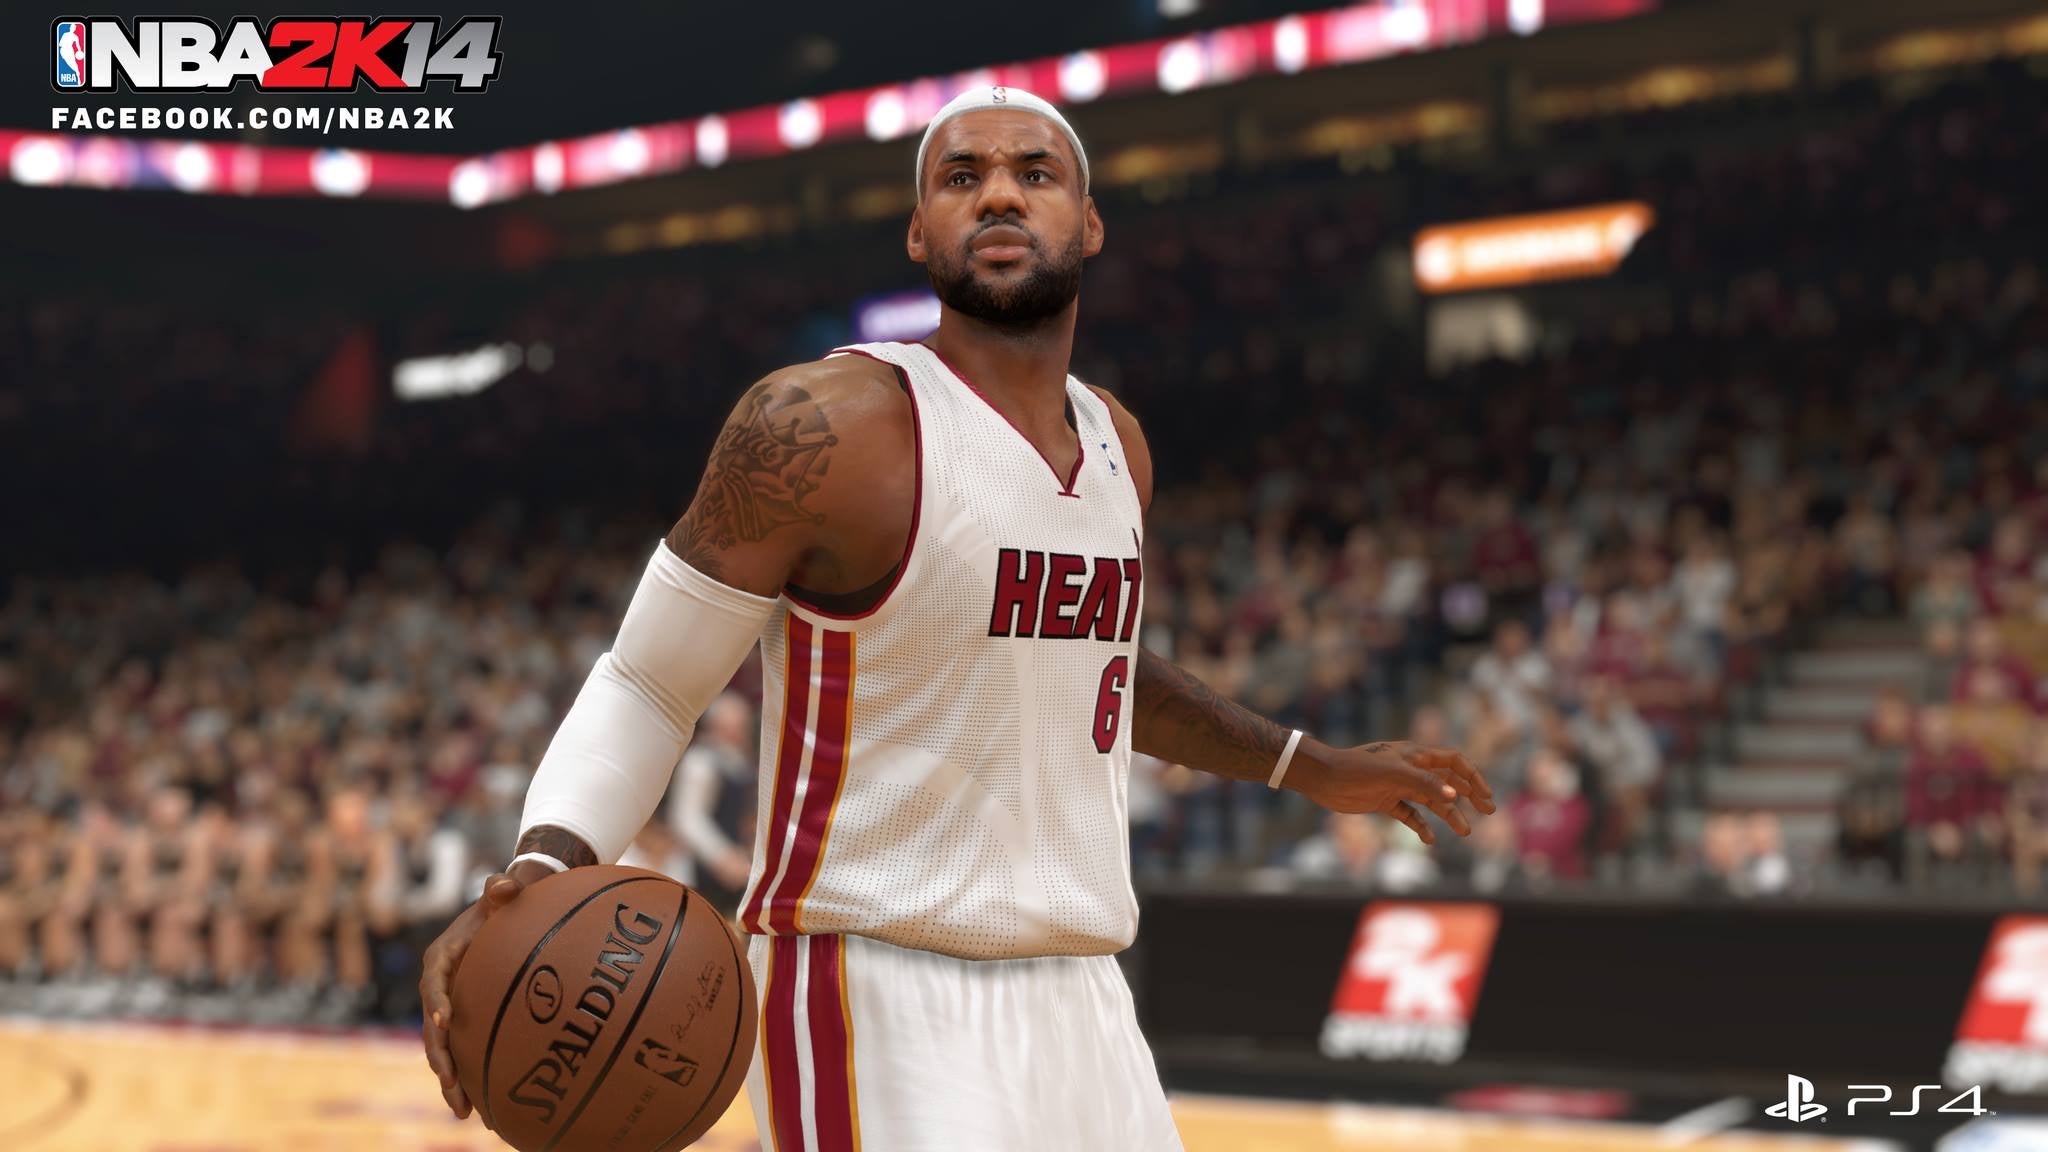 NBA 2K14 servers come back up, 2K online support periods to be extended.